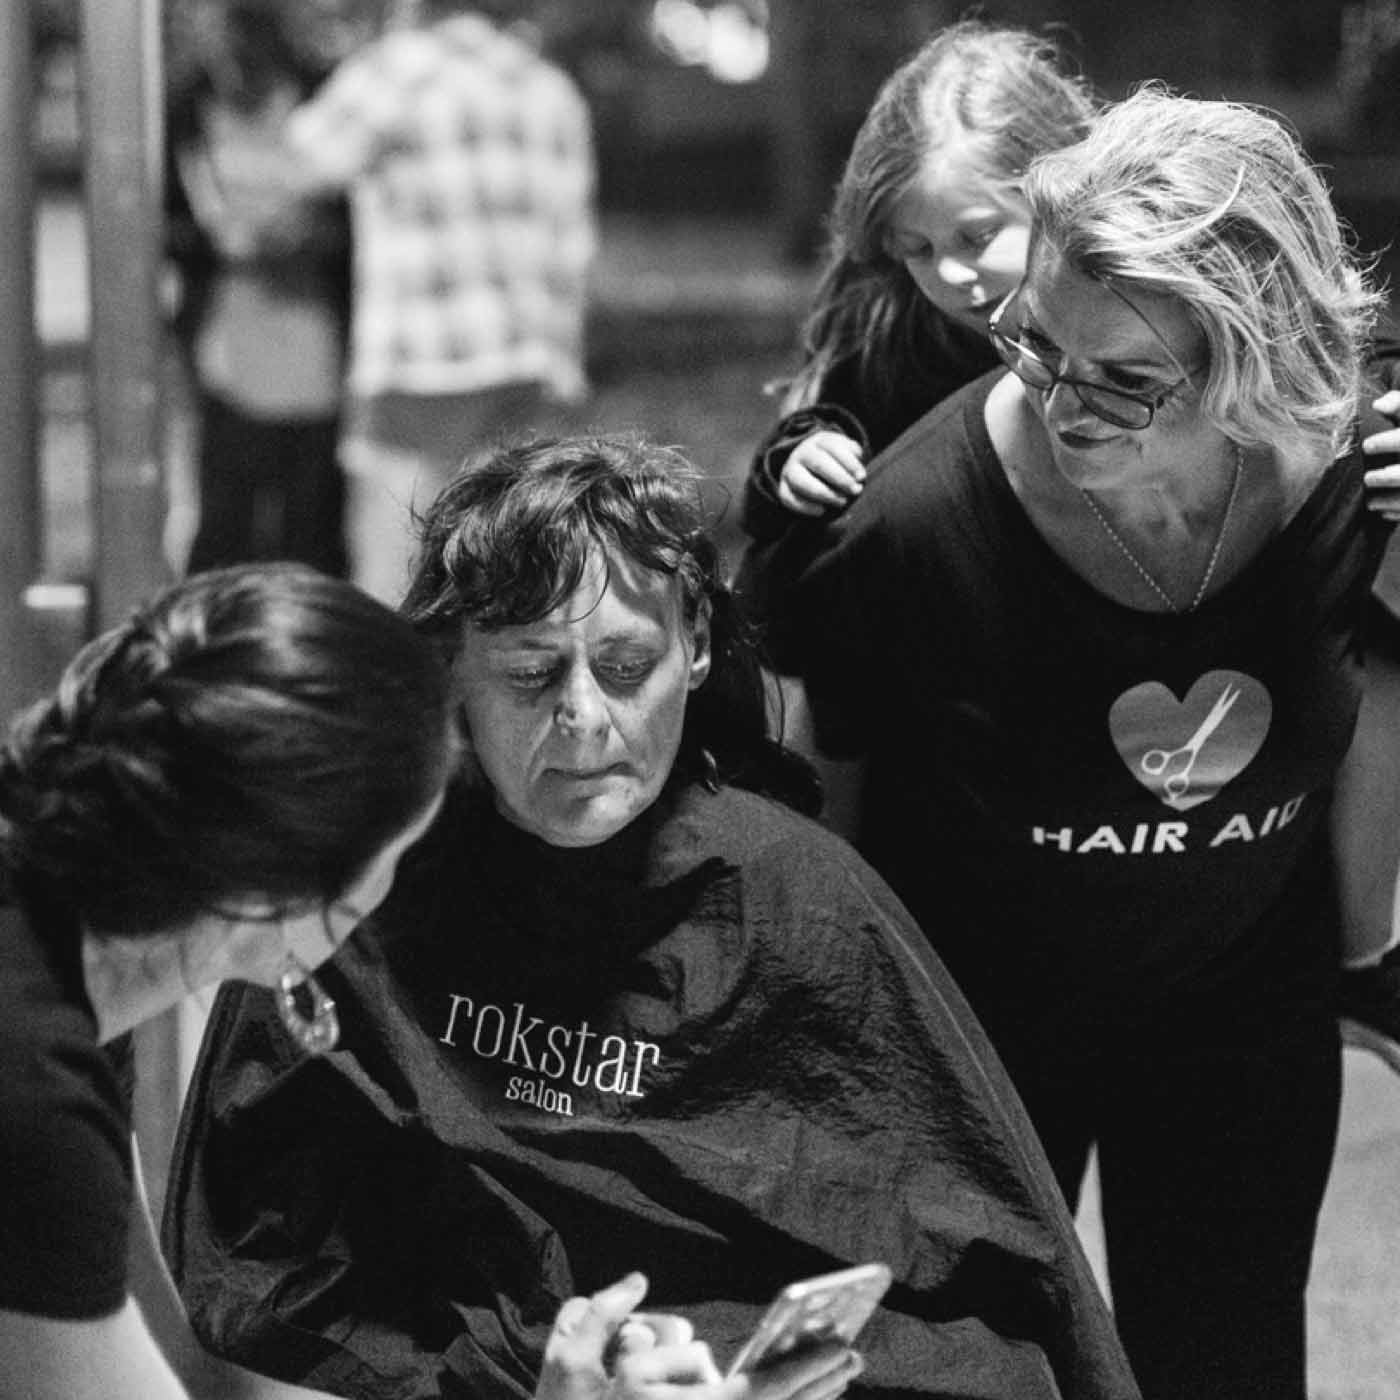 The Hair Aid team help folks learn about taking care of themselves